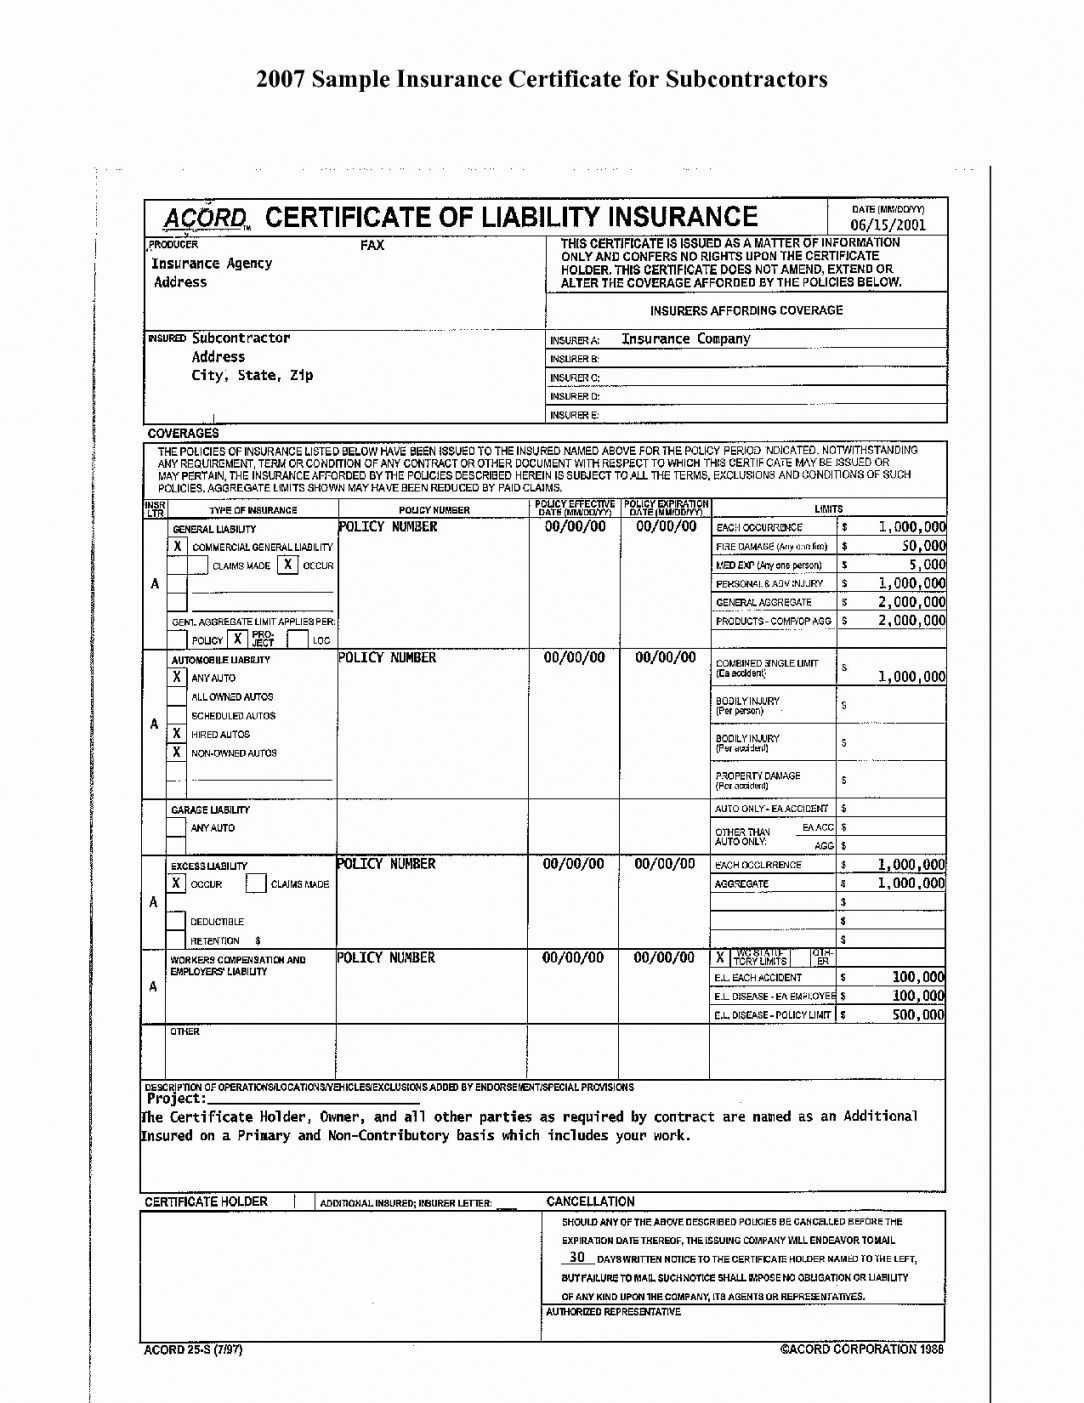 Editable Form Ificate Of Liability Insurance What Is Inside Certificate Of Liability Insurance Template